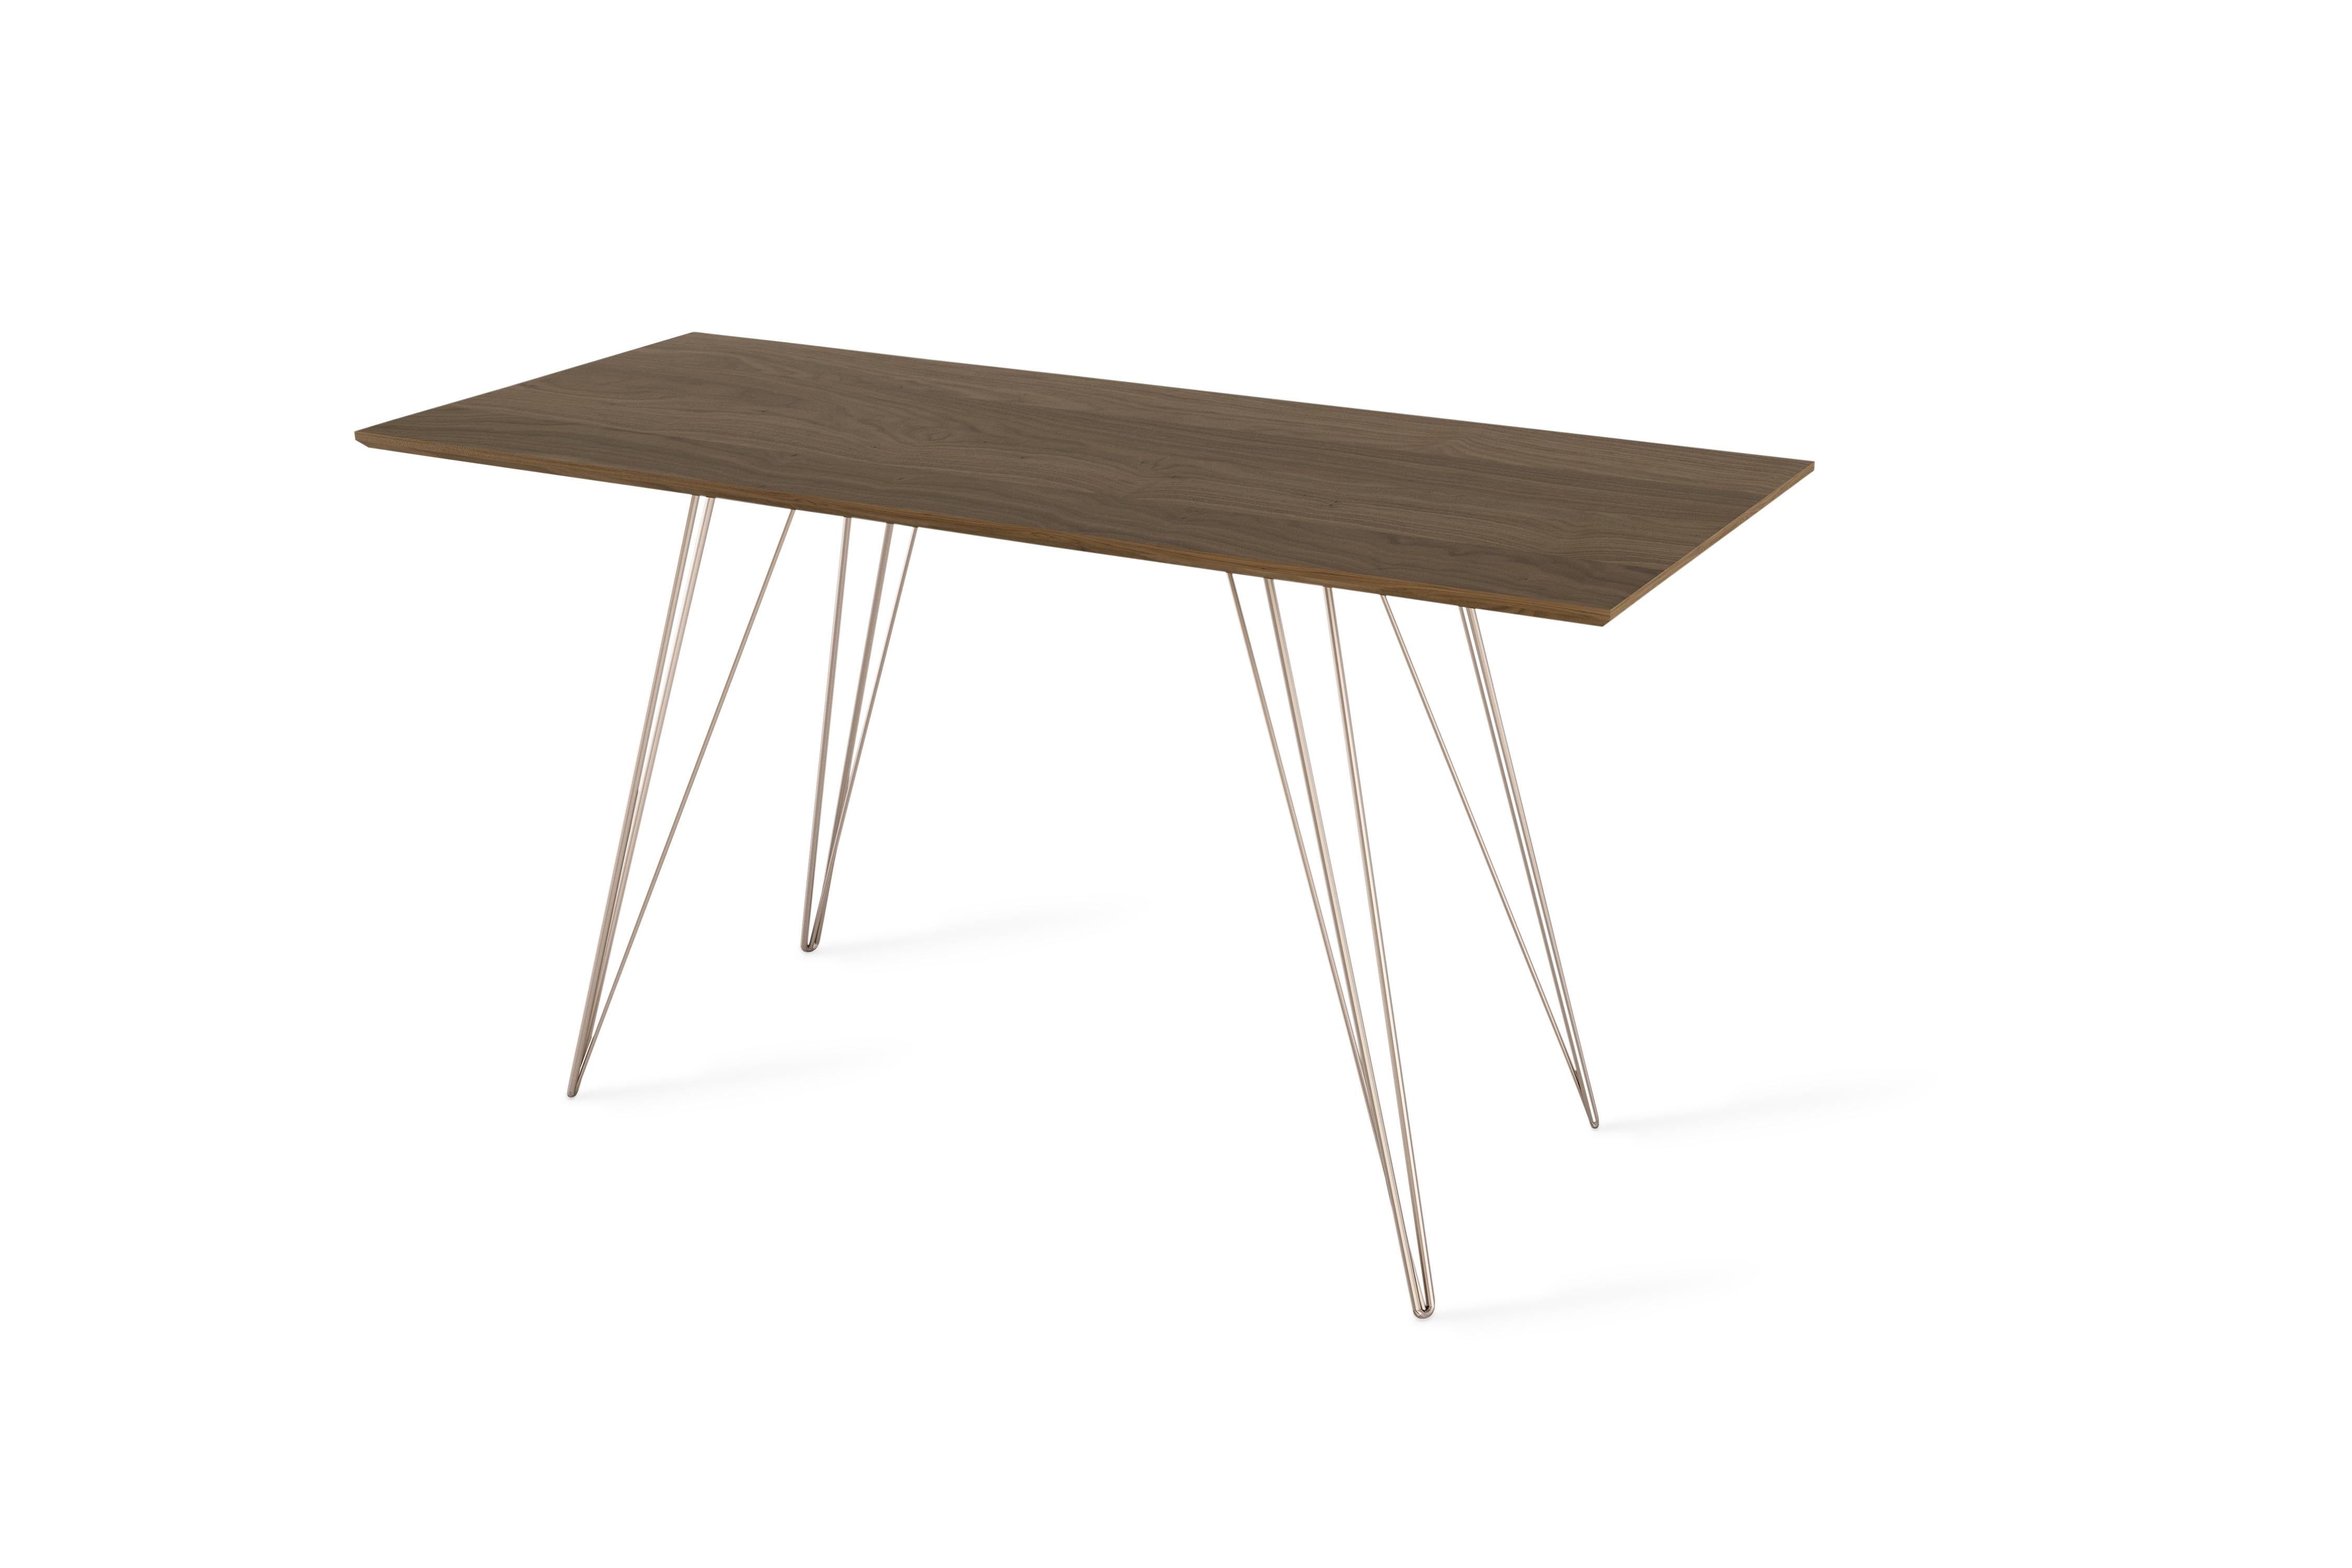 A thin, elegant and light desk that can be customized to any color desired. This handcrafted item perfectly blends industrial hairpin legs with a beveled wooden top. The irregular beauty of its natural wood combined with its simple elegant base